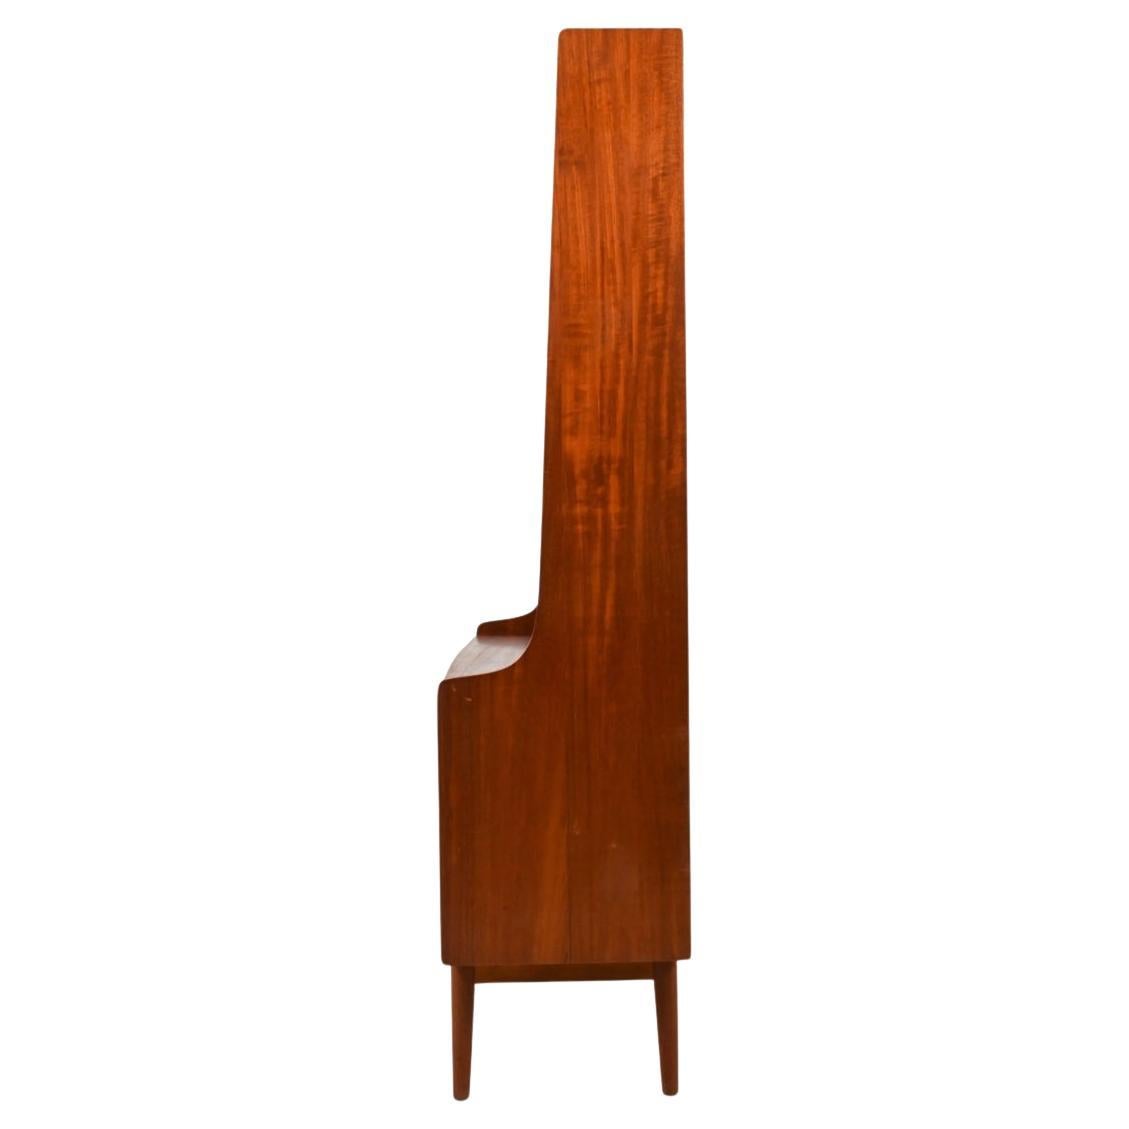 Mid Century Danish Modern Tall Teak bookcase with lower credenza By Designer Johannes Sorth. This tall bookcase has 4 back shelves and 1 Adjustable shelf inside the lower sliding door credenza. C. 1960 With model No. 335-113 on back panel and 1967